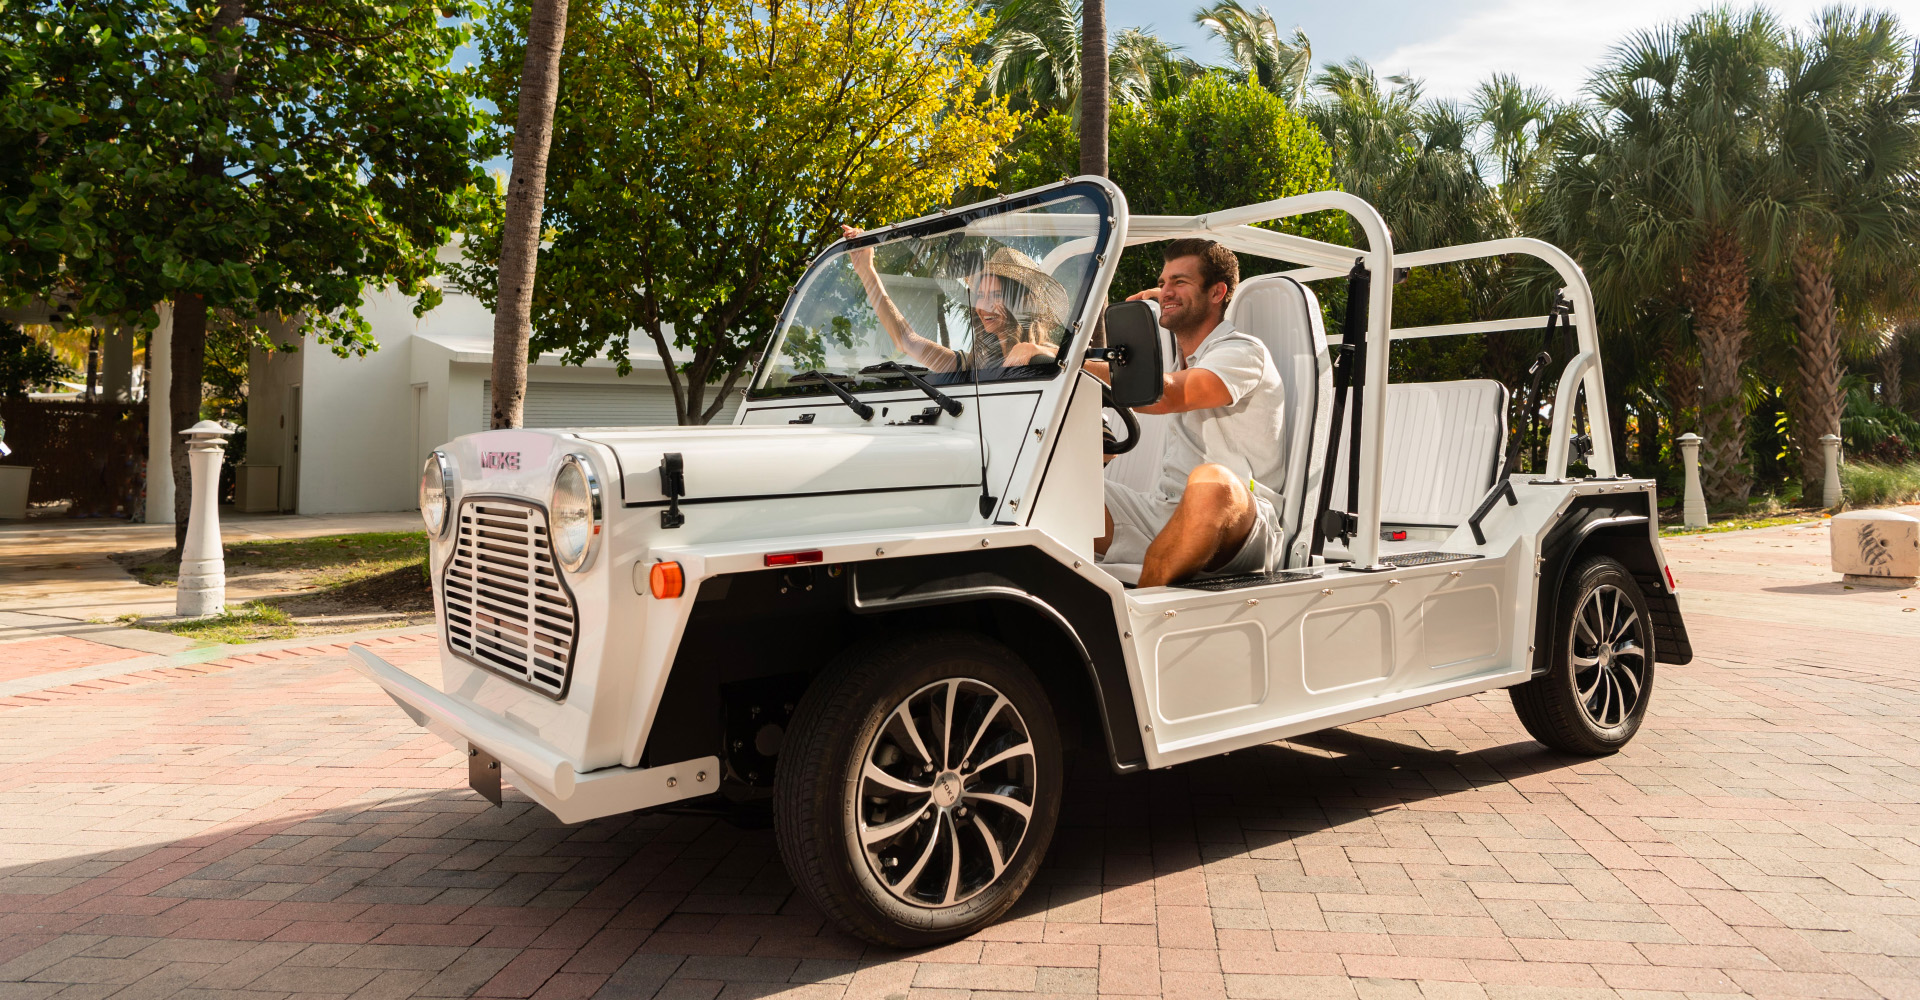 Best Vehicles to Rent for Family Vacation